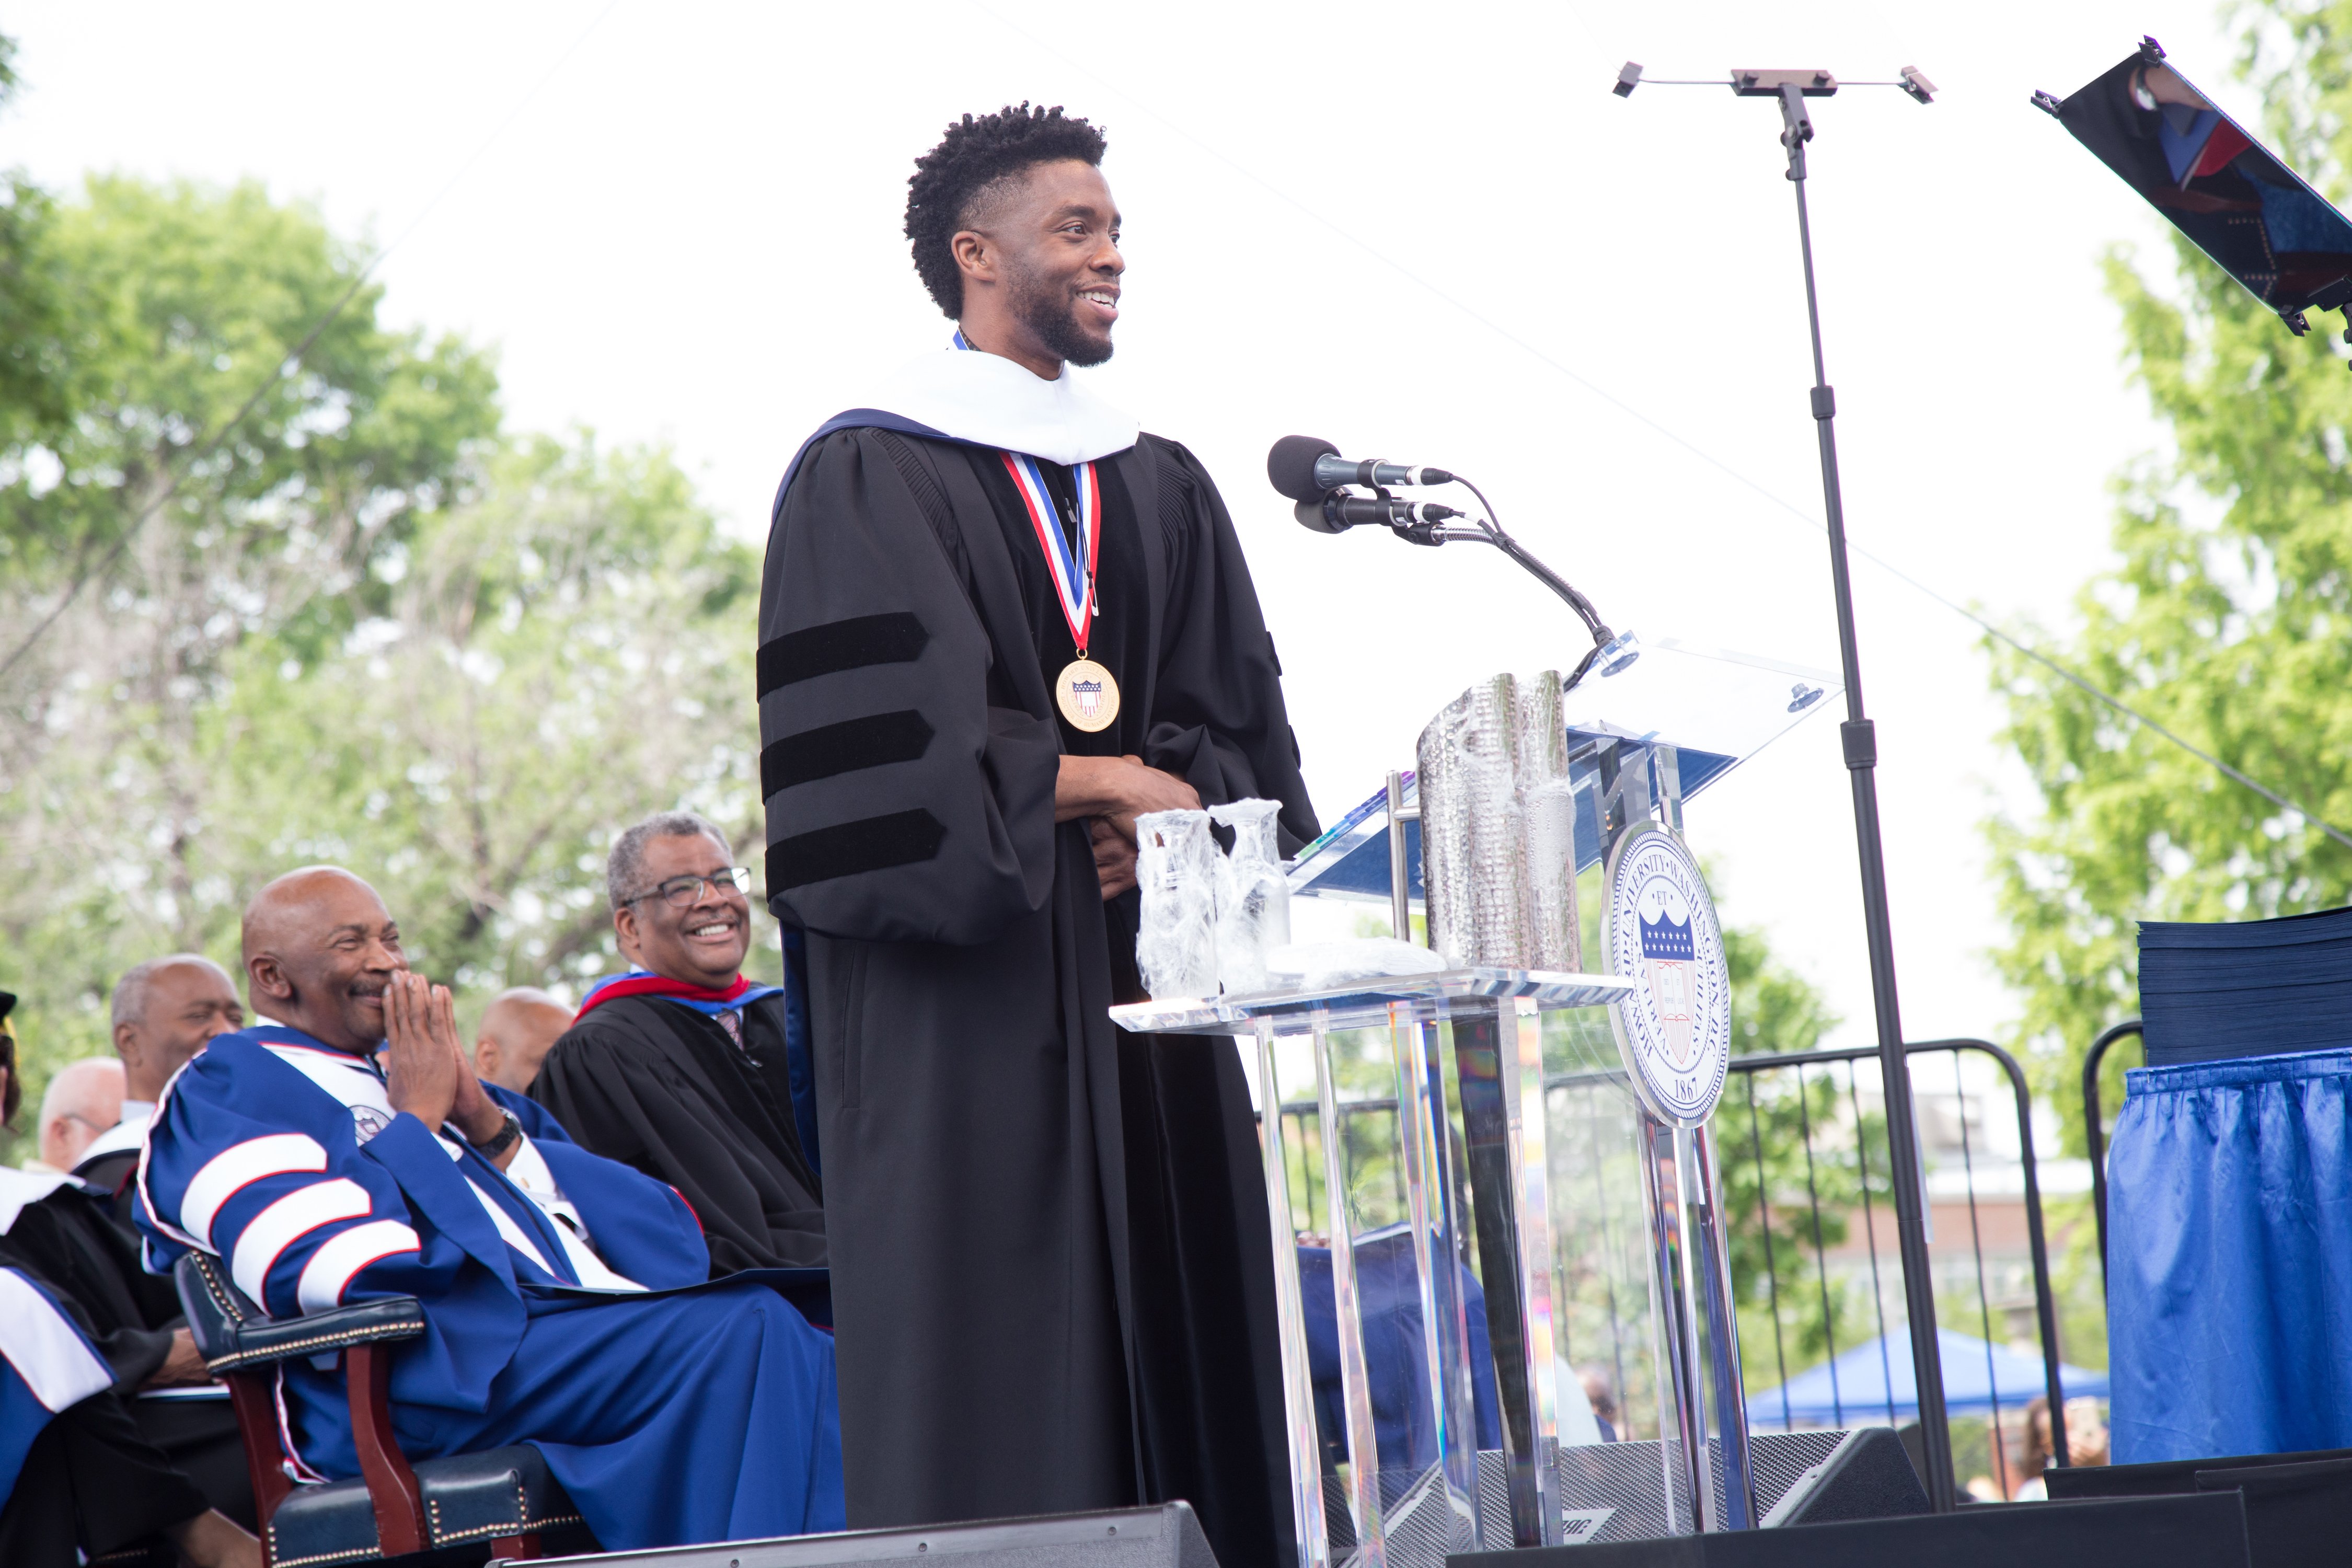 Chadwick Boseman, a Howard alumnus, receiving an Honorary Doctorate Degree at the 2018 Howard University Commencement Ceremony at Howard University in Washington, DC | Photo: Brian Stukes/Getty Images